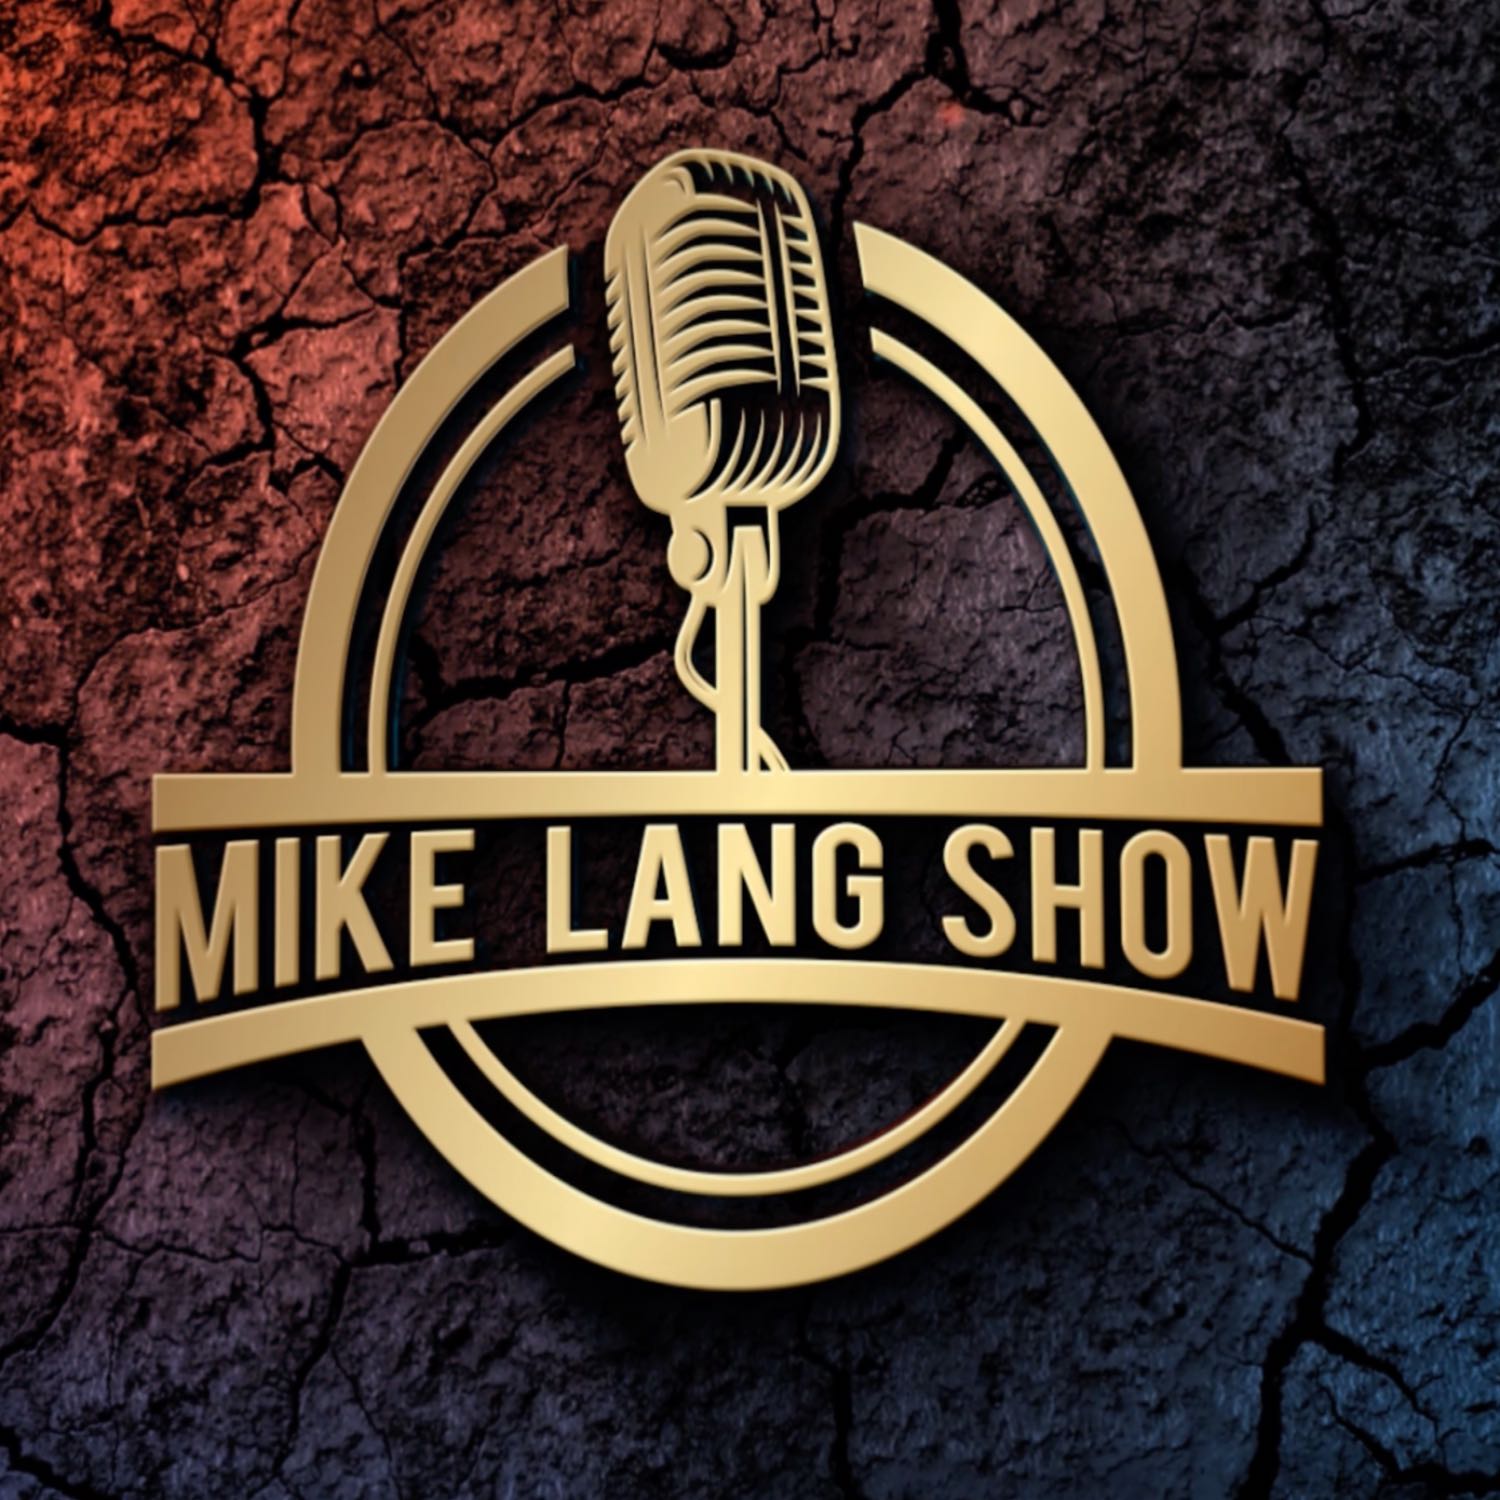 The Mike Lang Show